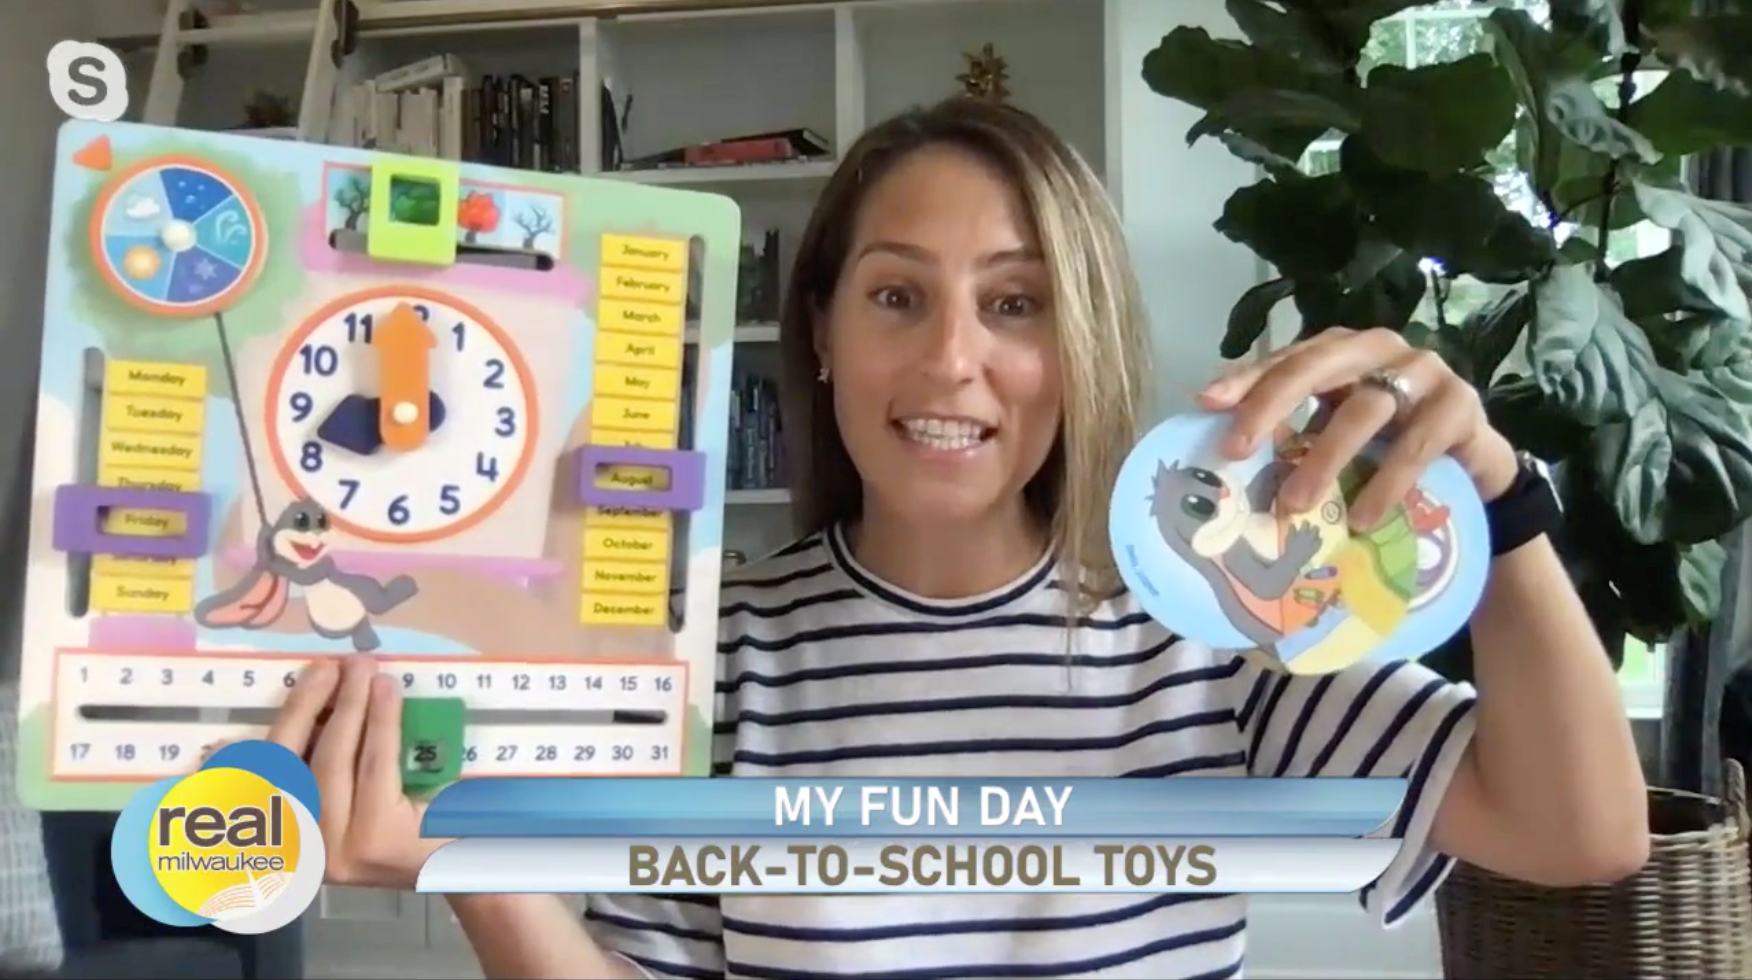 My Fun Day activity board is a great back-to-school learning tool